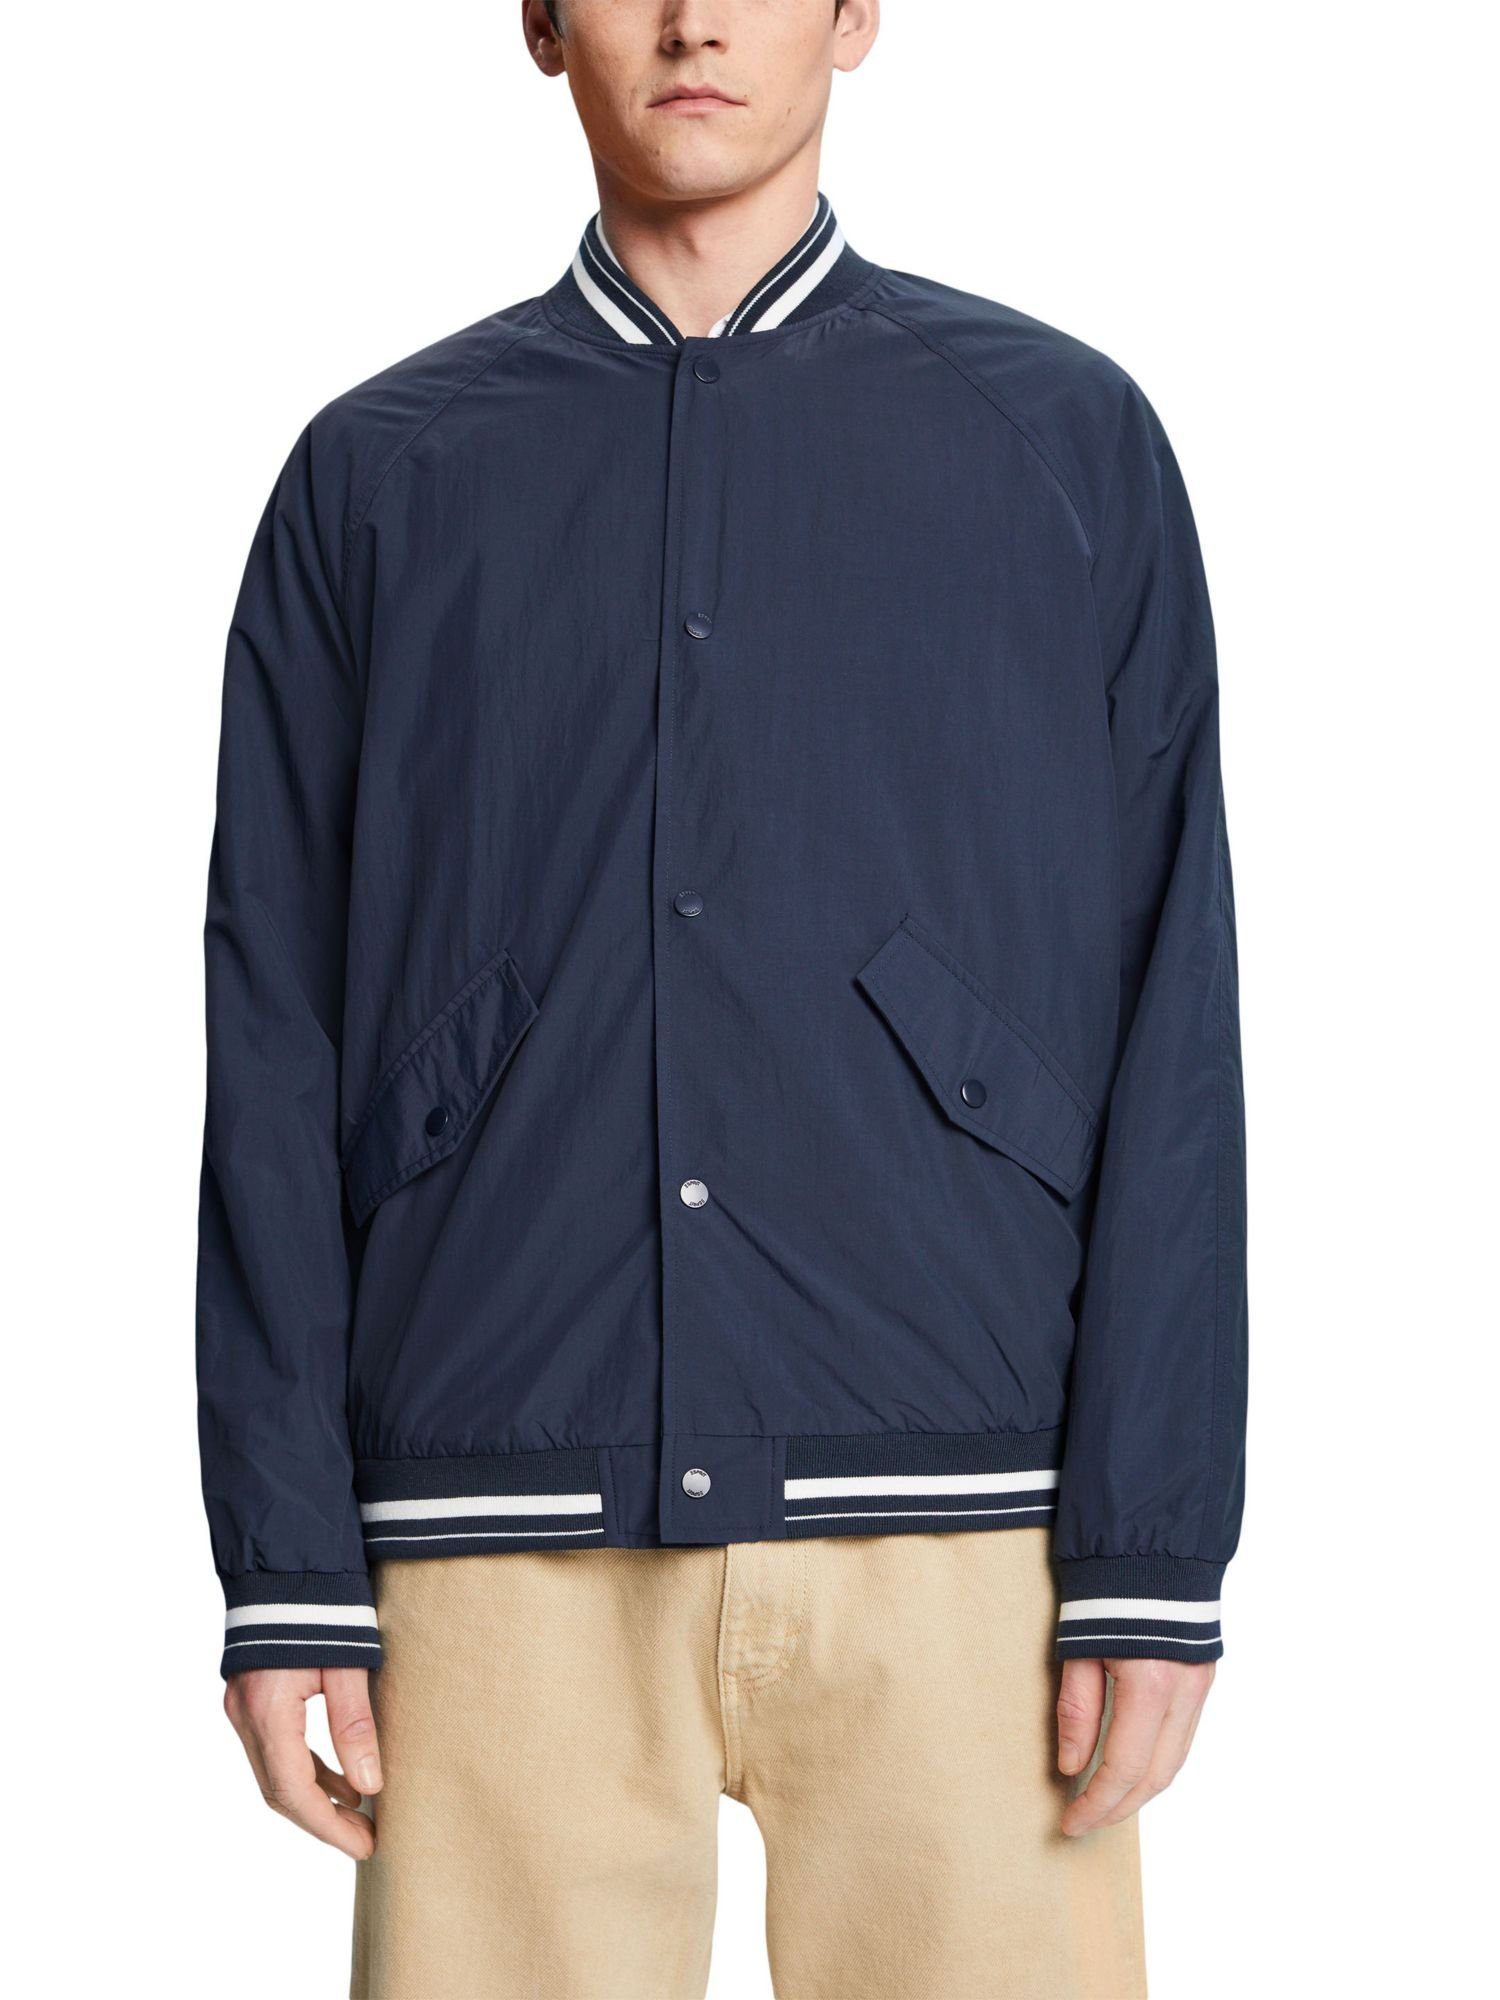 woven Esprit by Collegejacke outdoor edc Jackets